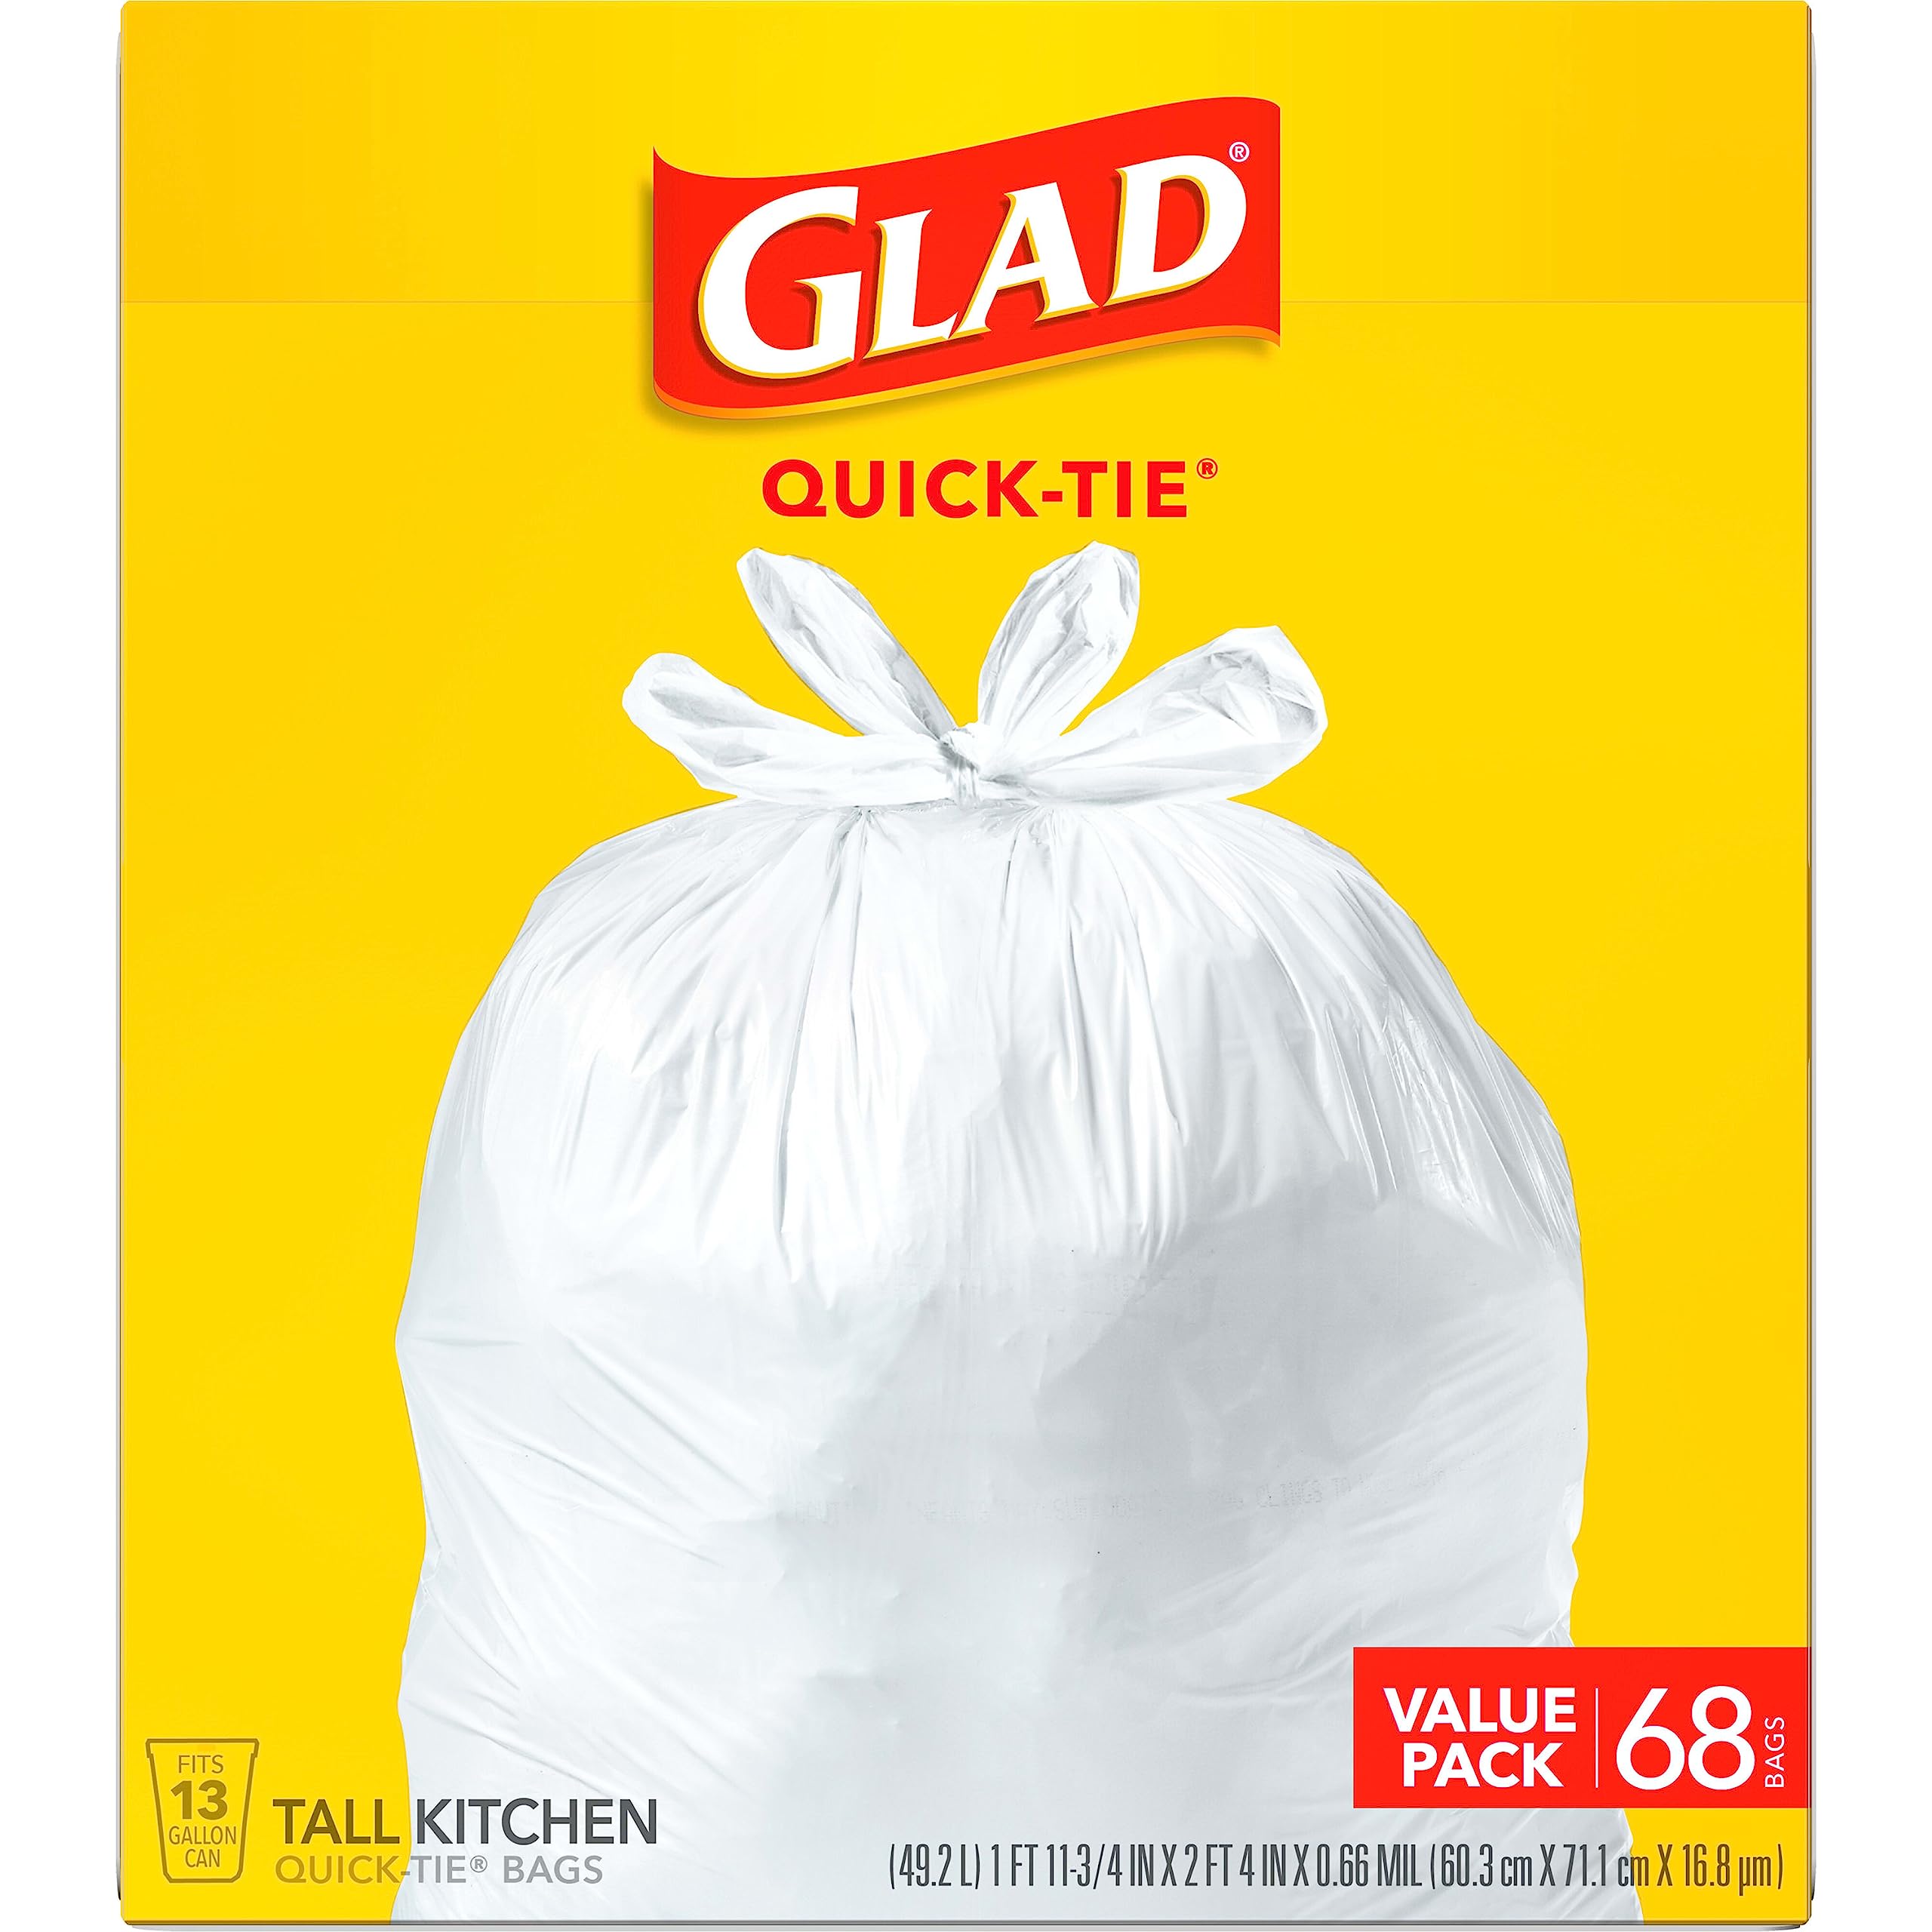 Glad Tall Kitchen Quick-Tie Trash Bags, 13 Gallon, White, 68 Count, Pack May Vary